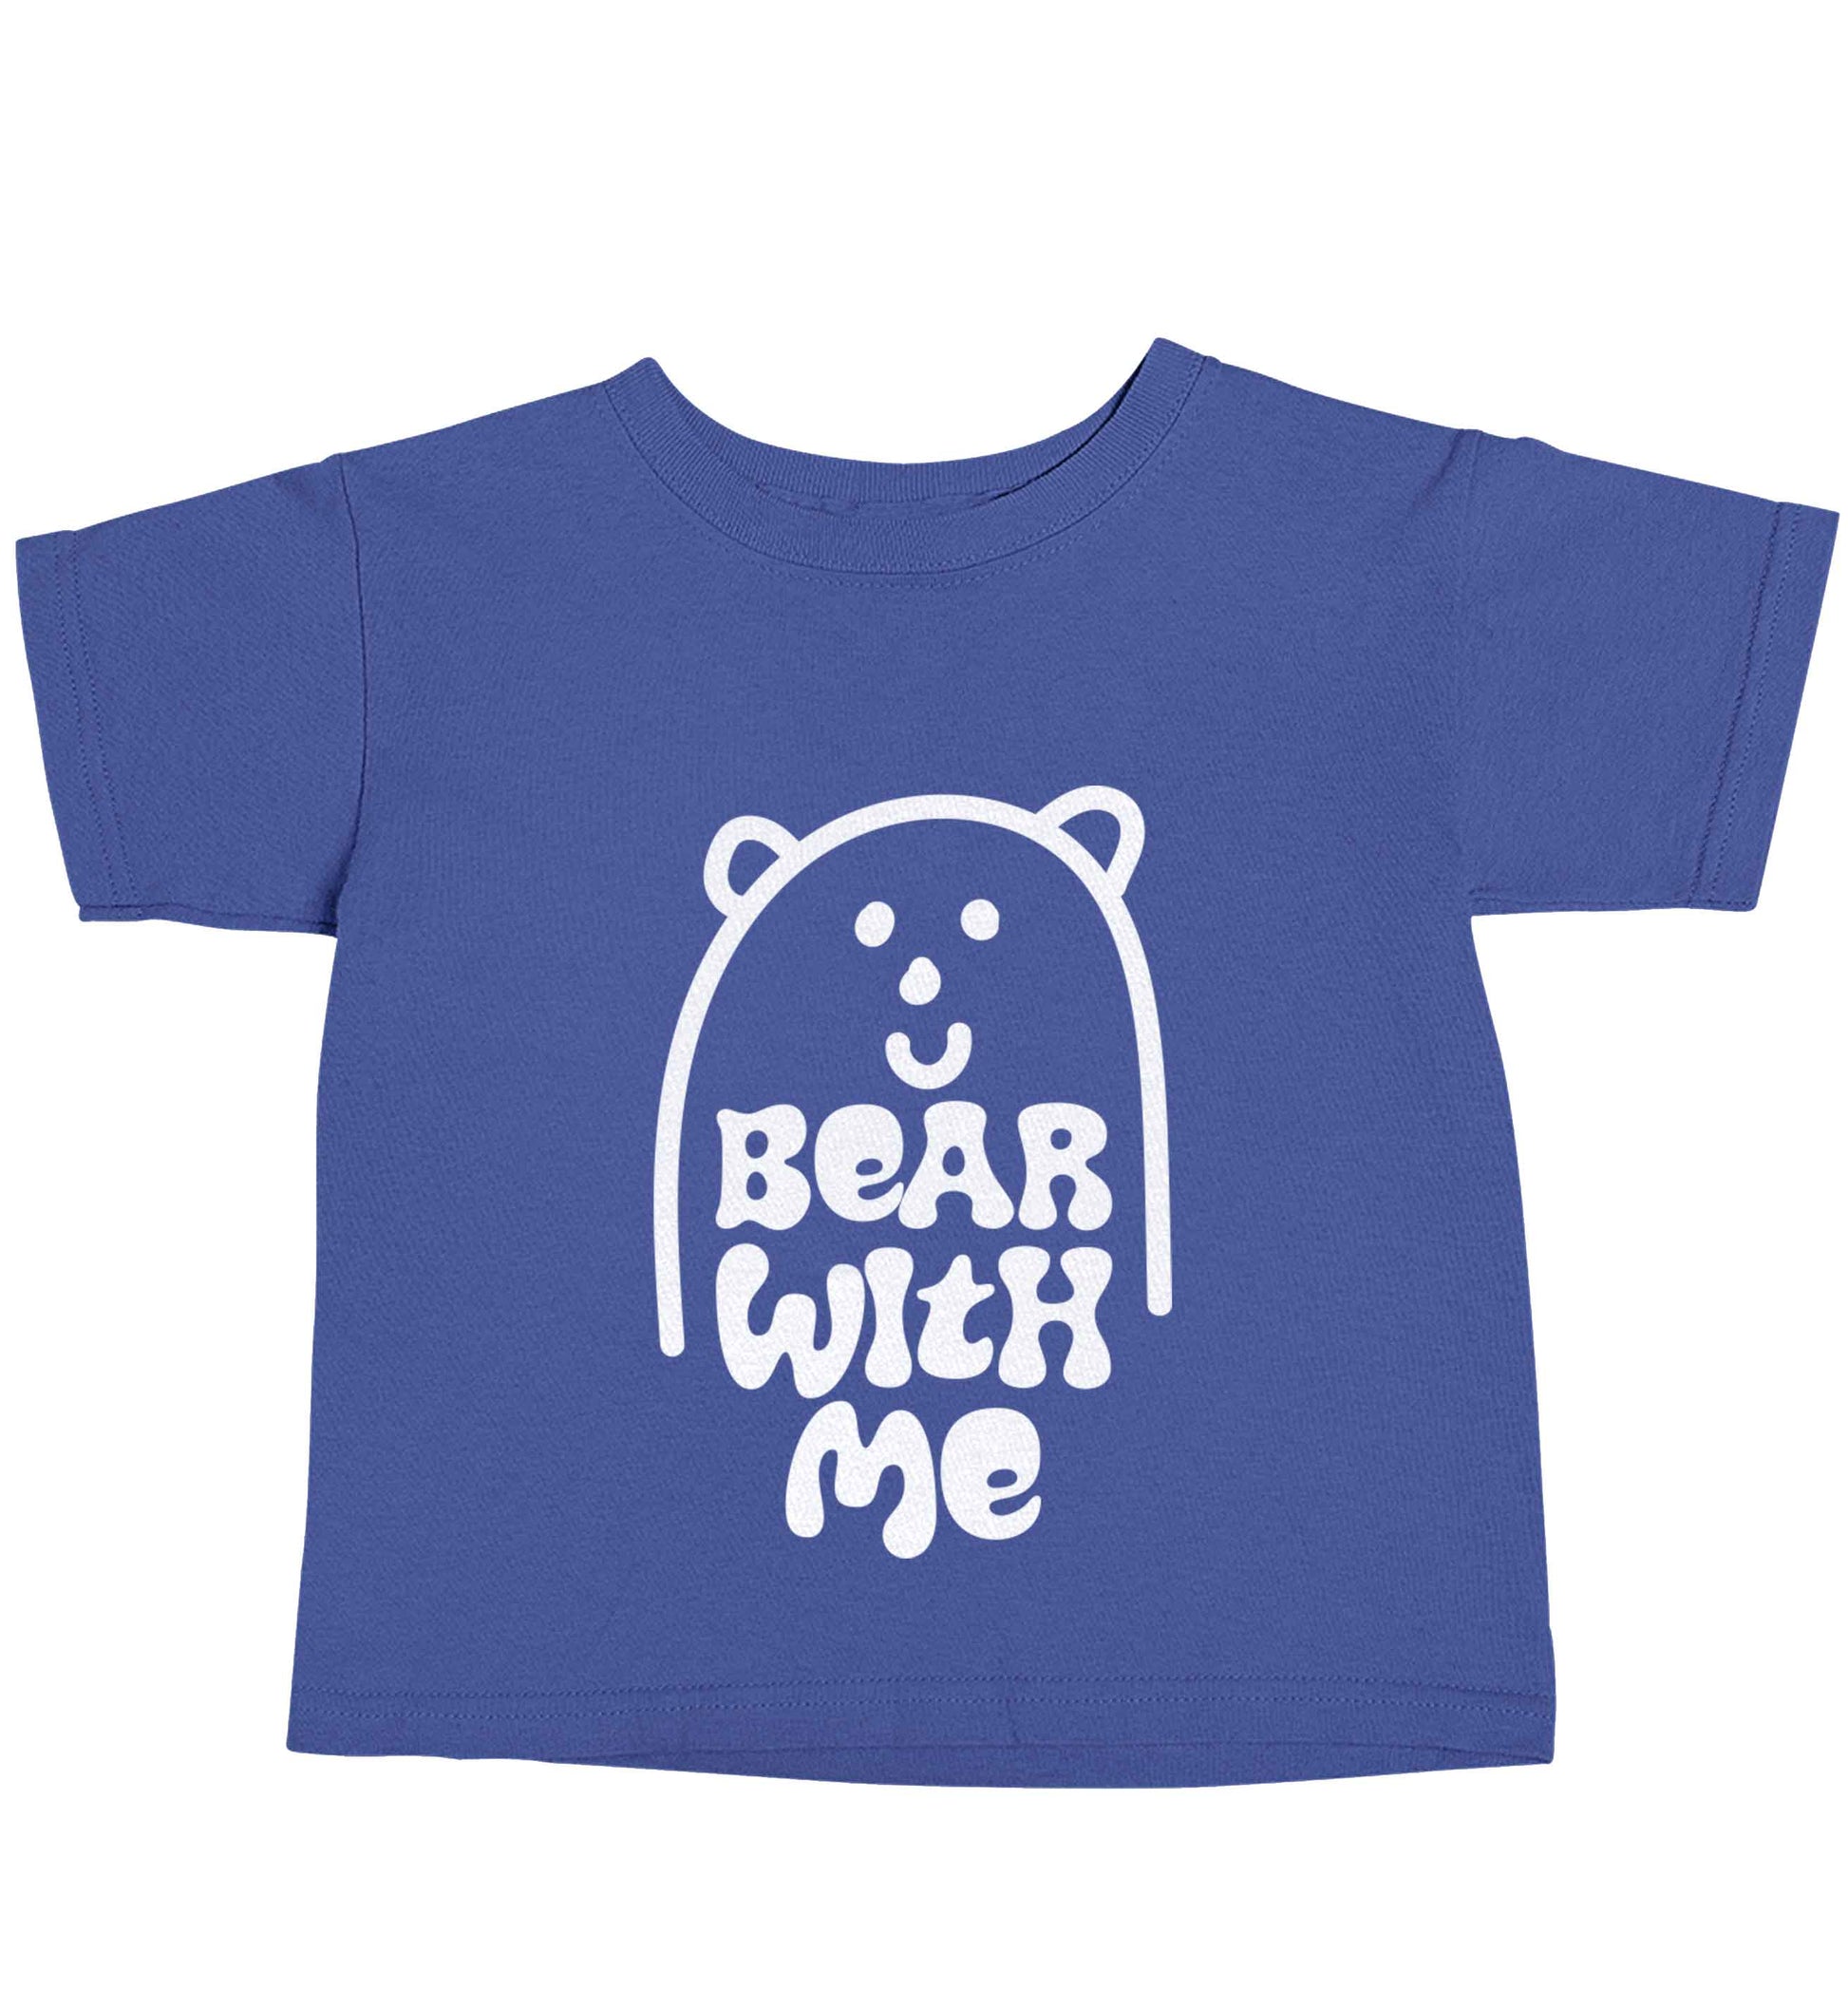 Bear With Me Kit blue baby toddler Tshirt 2 Years